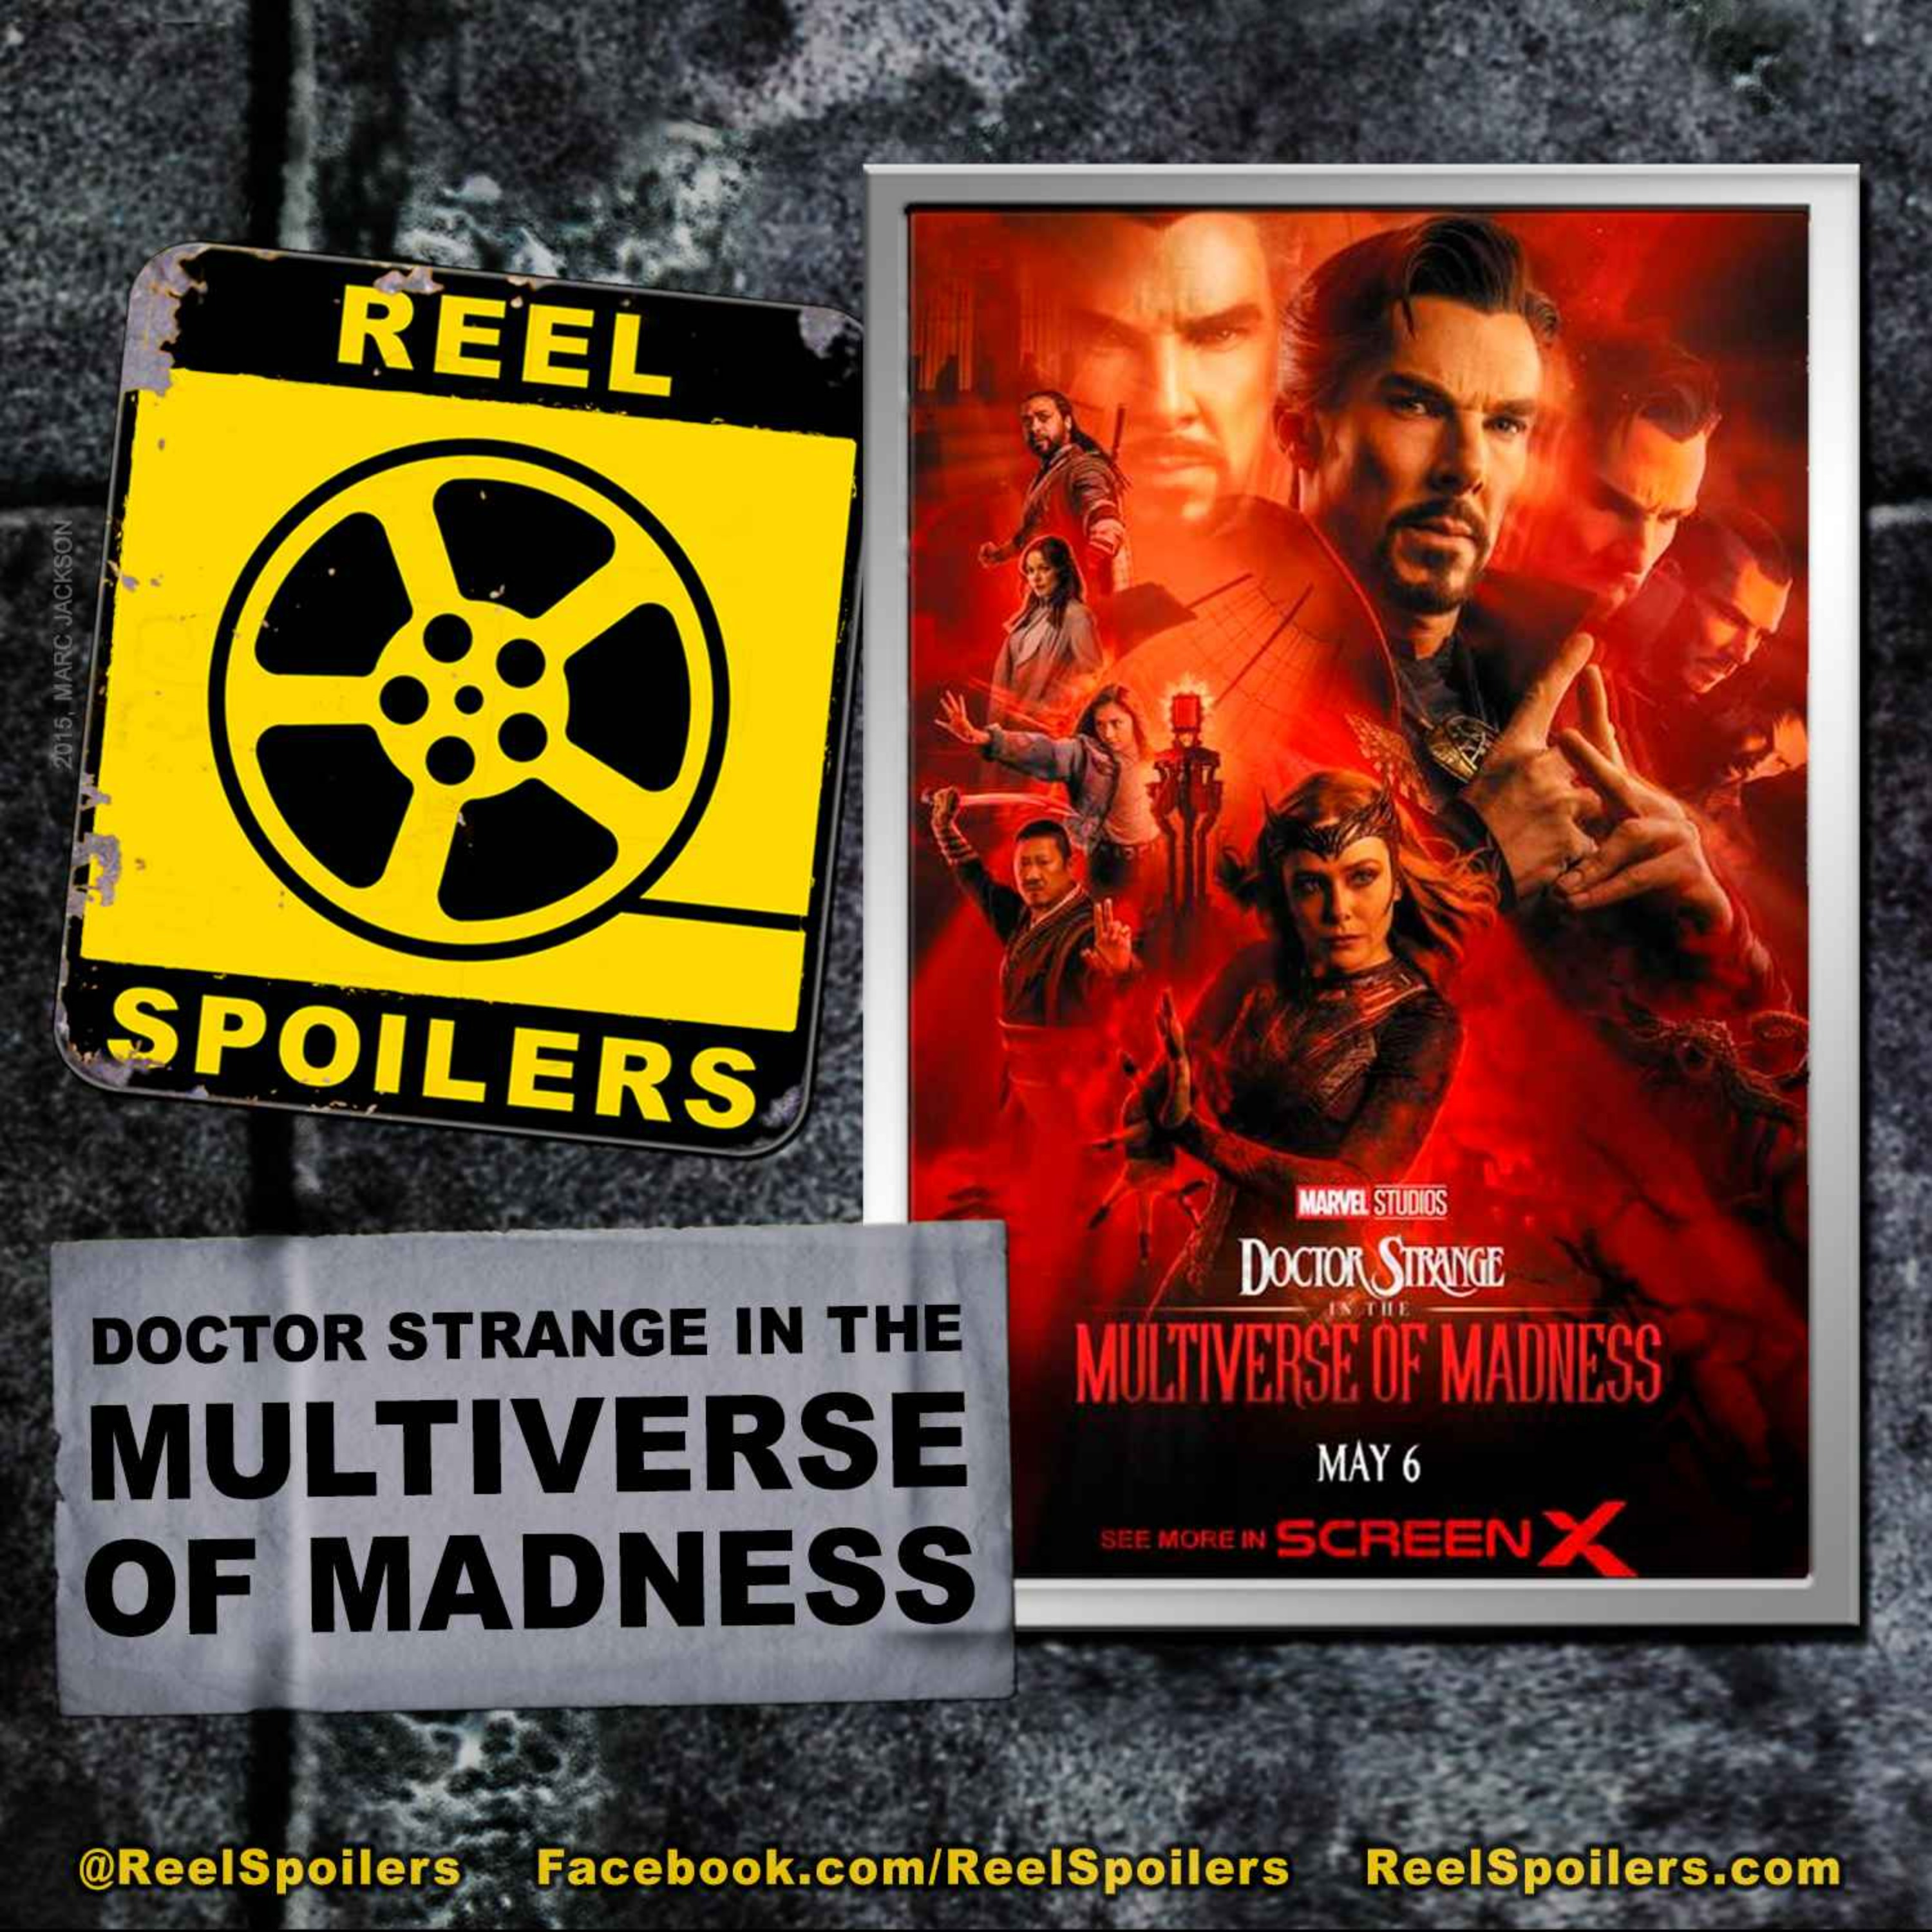 DOCTOR STRANGE IN THE MULTIVERSE OF MADNESS Image